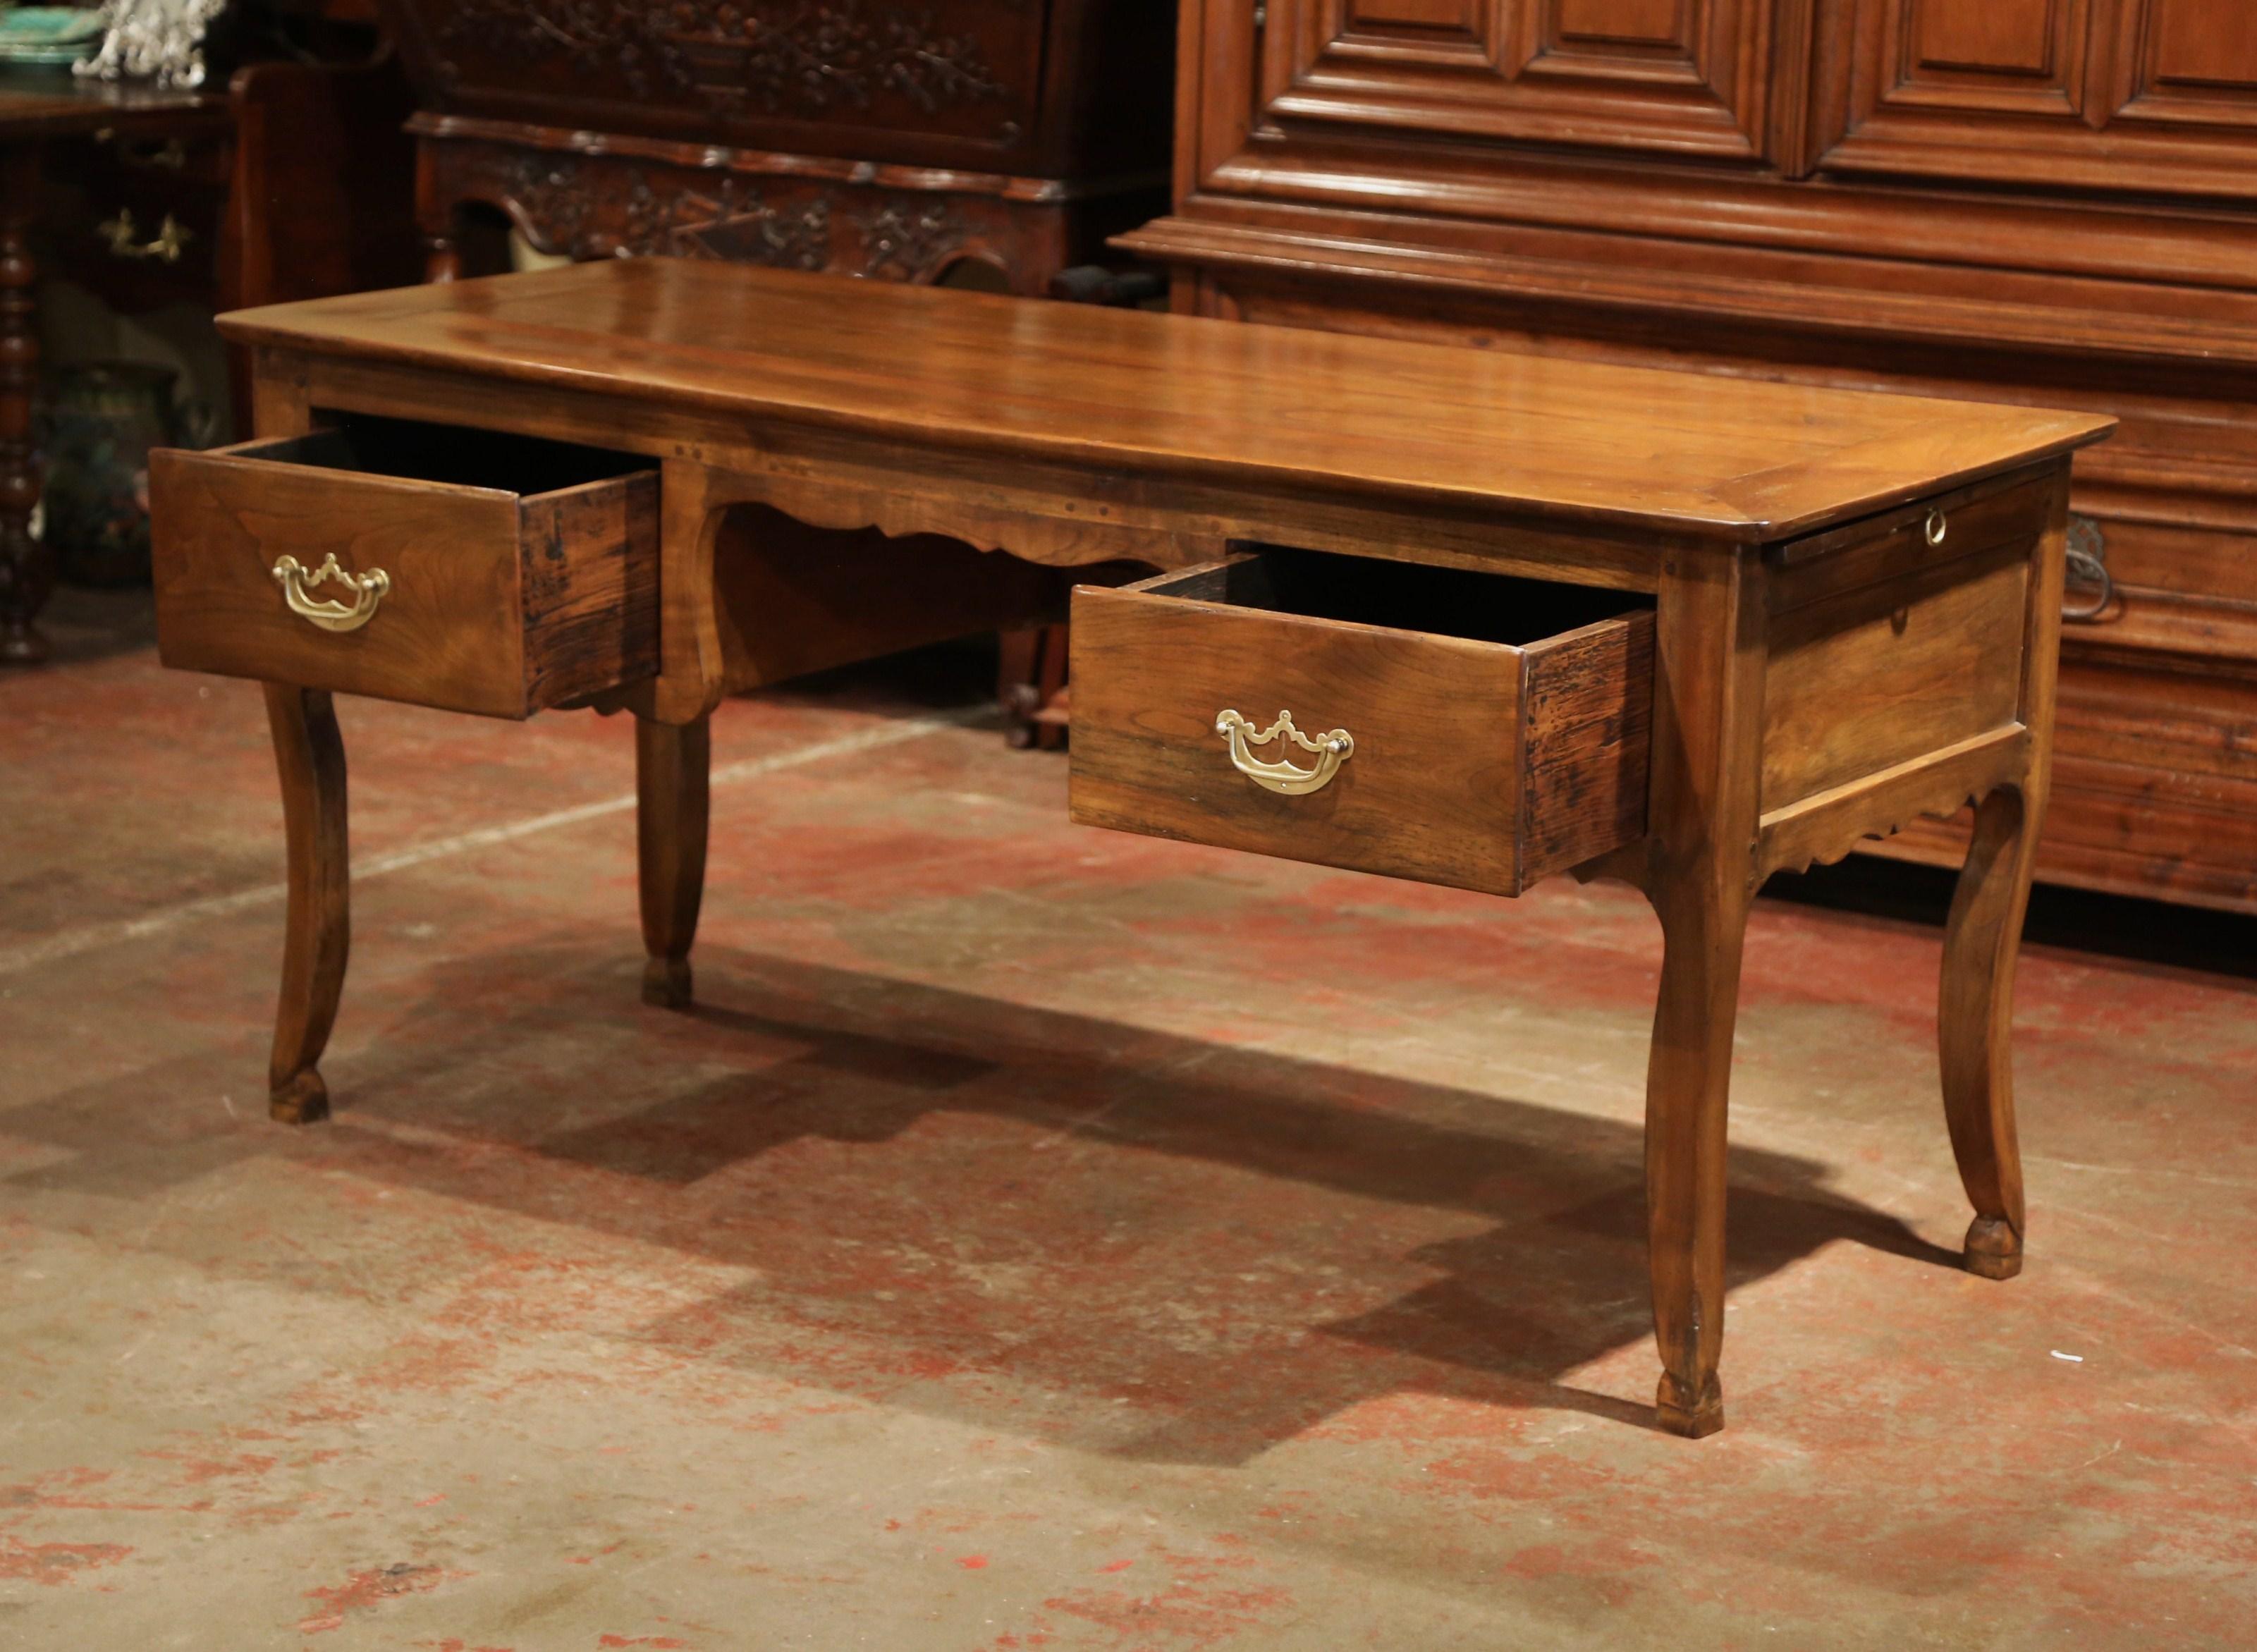 Hand-Carved 19th Century French Louis XV Carved Cherry Desk with Drawers and Pull Out Trays